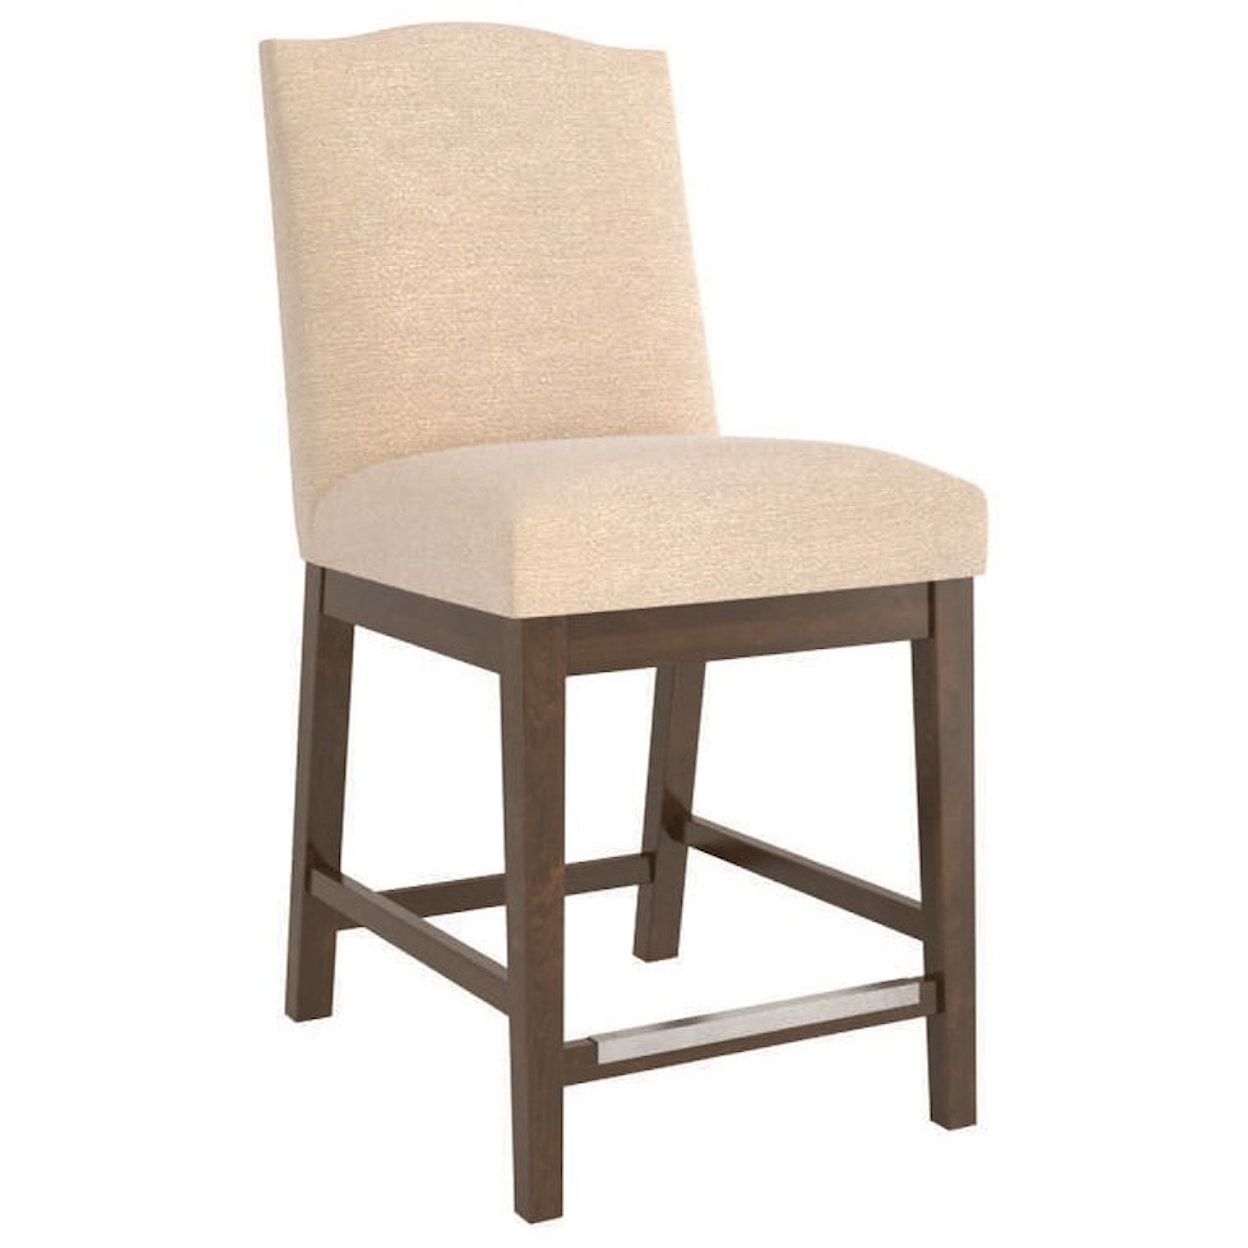 Canadel Classic Customizable Upholstered Counter Stool